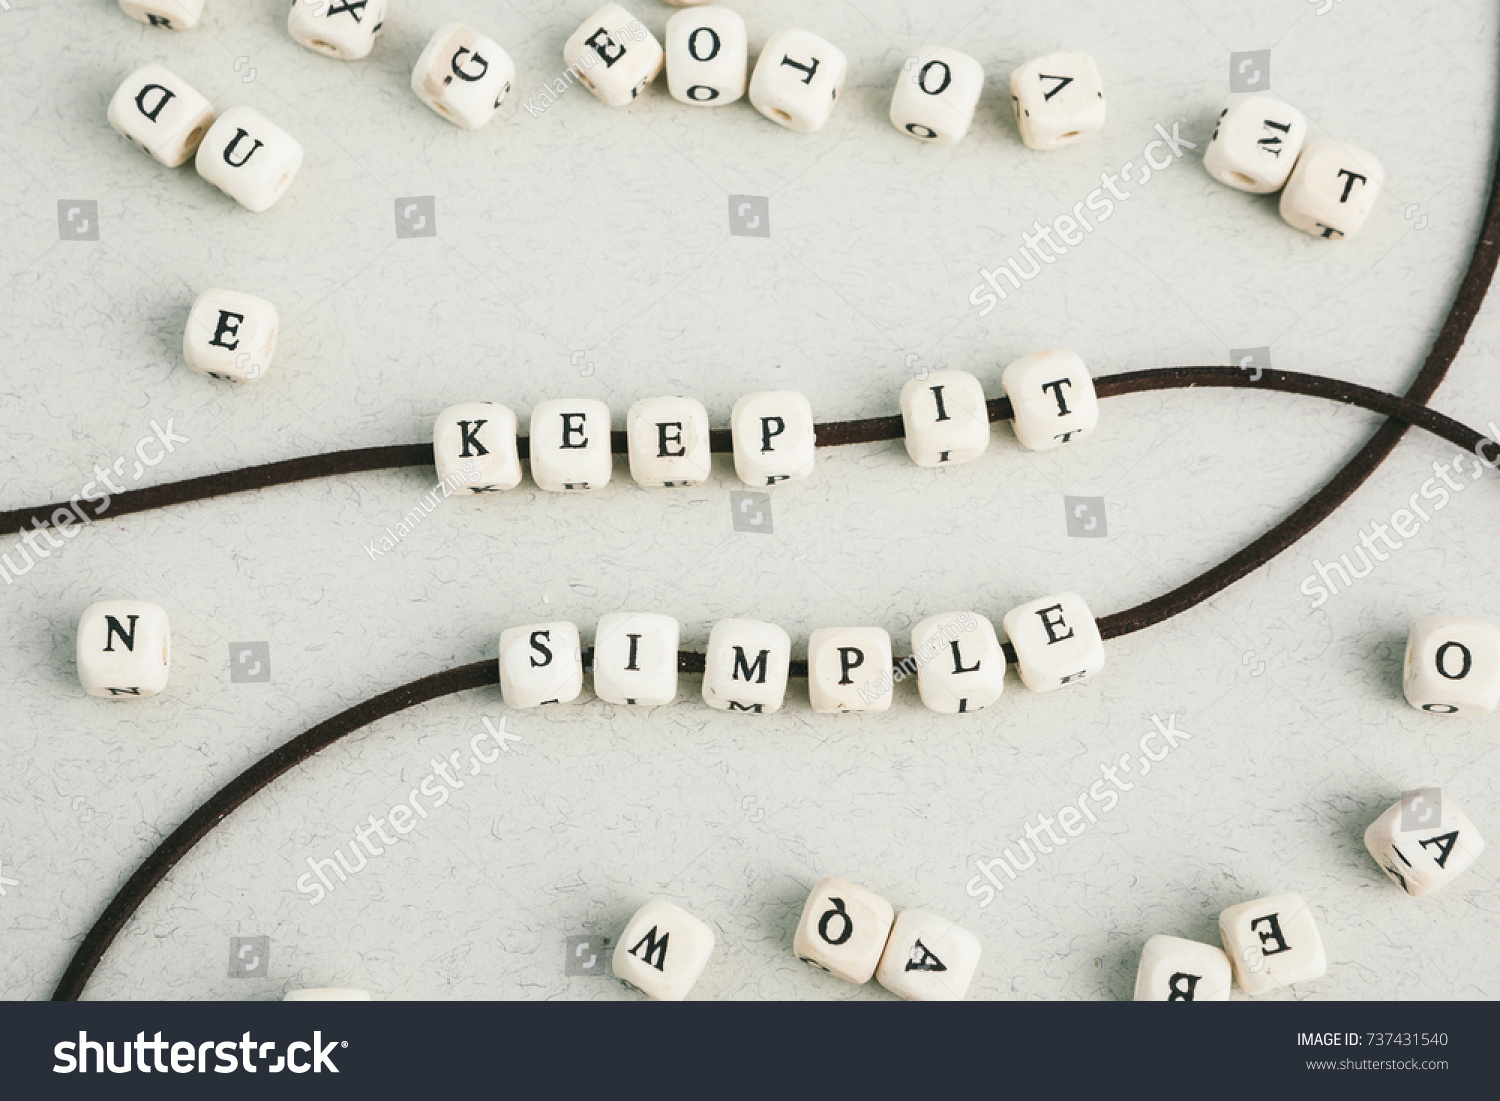 Motivation phrase Time is now from wooden beads strung on leather cord. Vertical composition. a series of photos with words and phrases #737431540